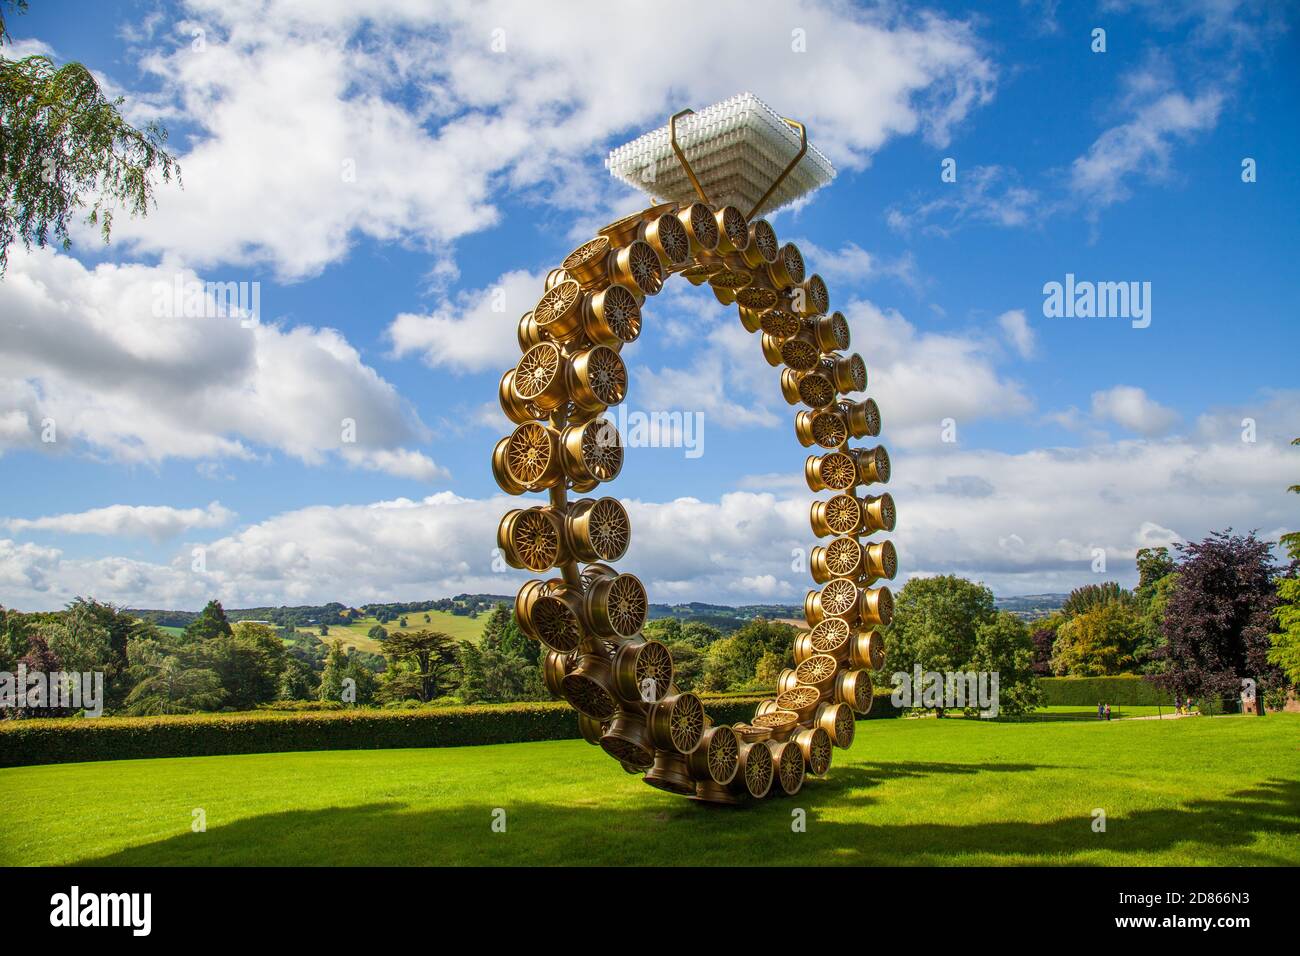 Solitare by the Porugeuse artist Joana Vasconcelos at the Yorkshire sculpture park near Wakefield, UK Stock Photo